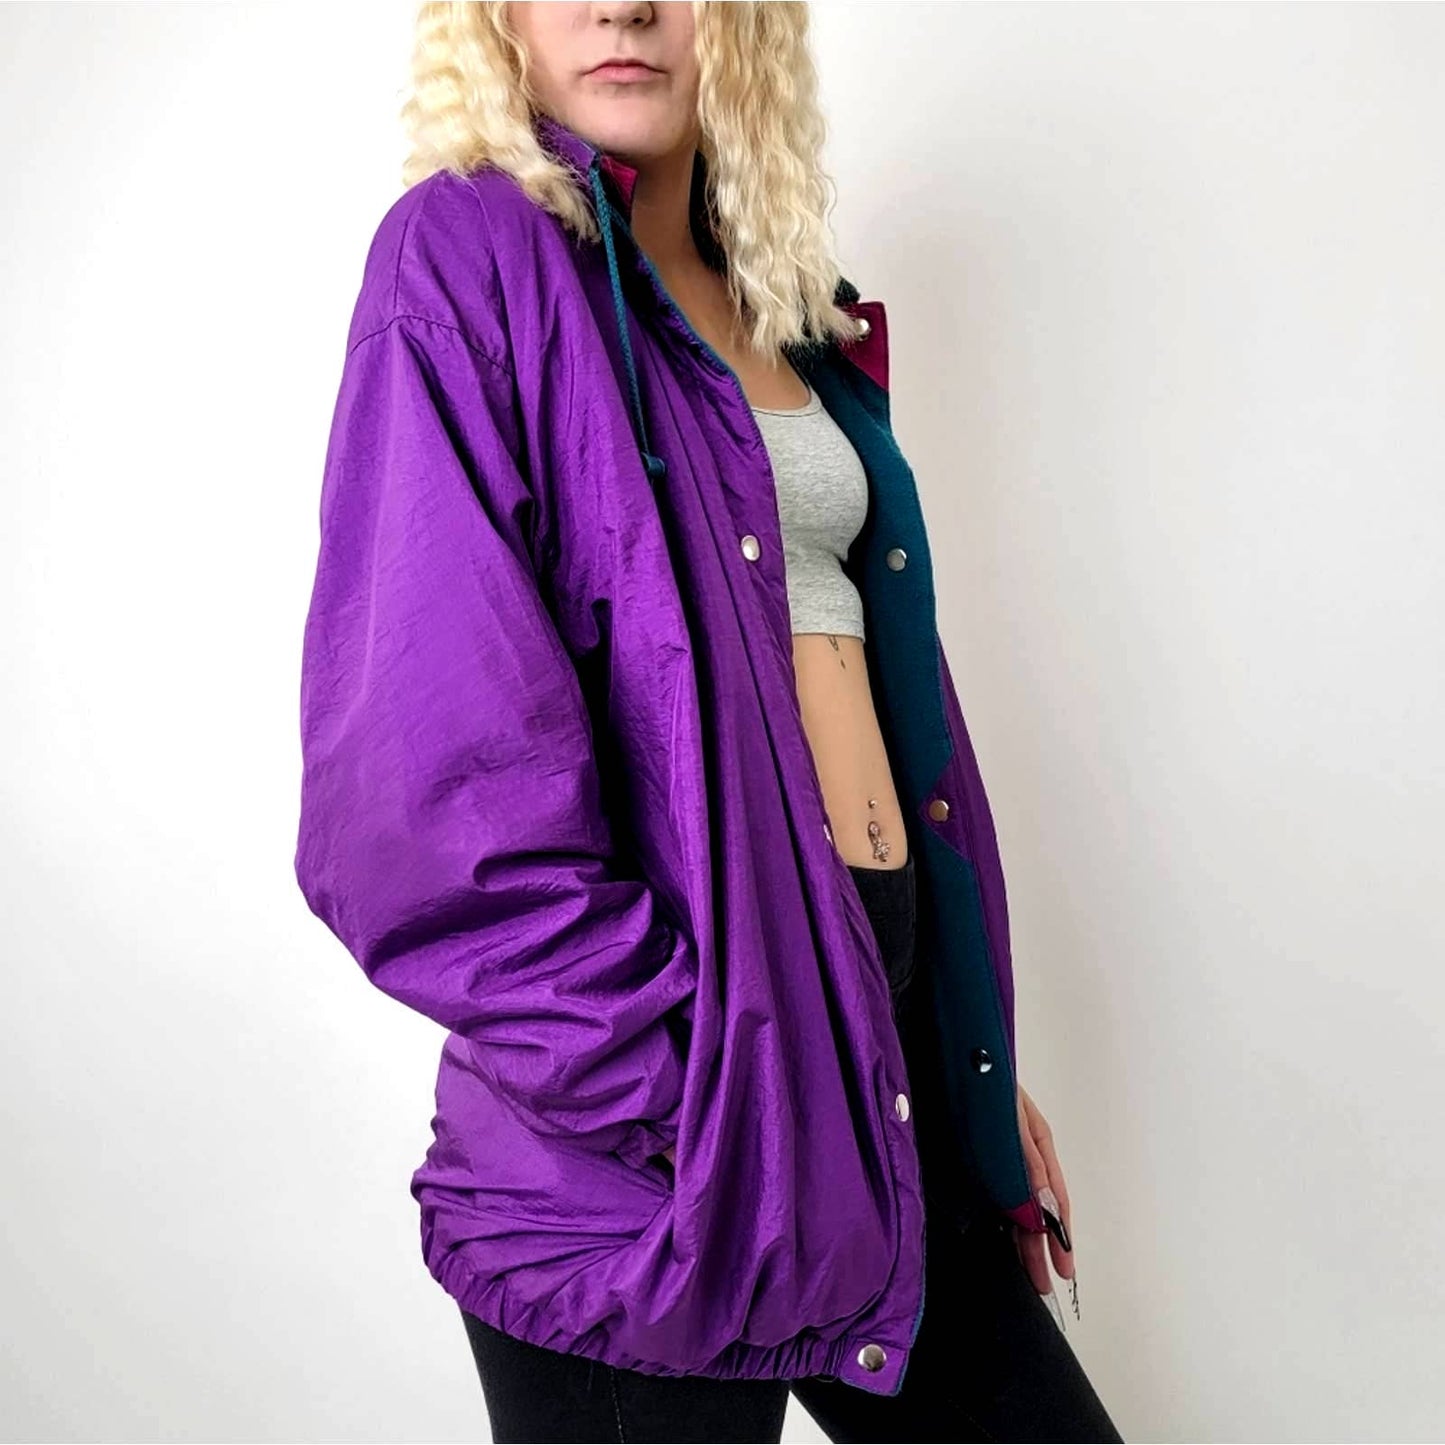 Vintage 90's Reversible Teal and Purple Lightweight Cotton Oversized Jacket - M